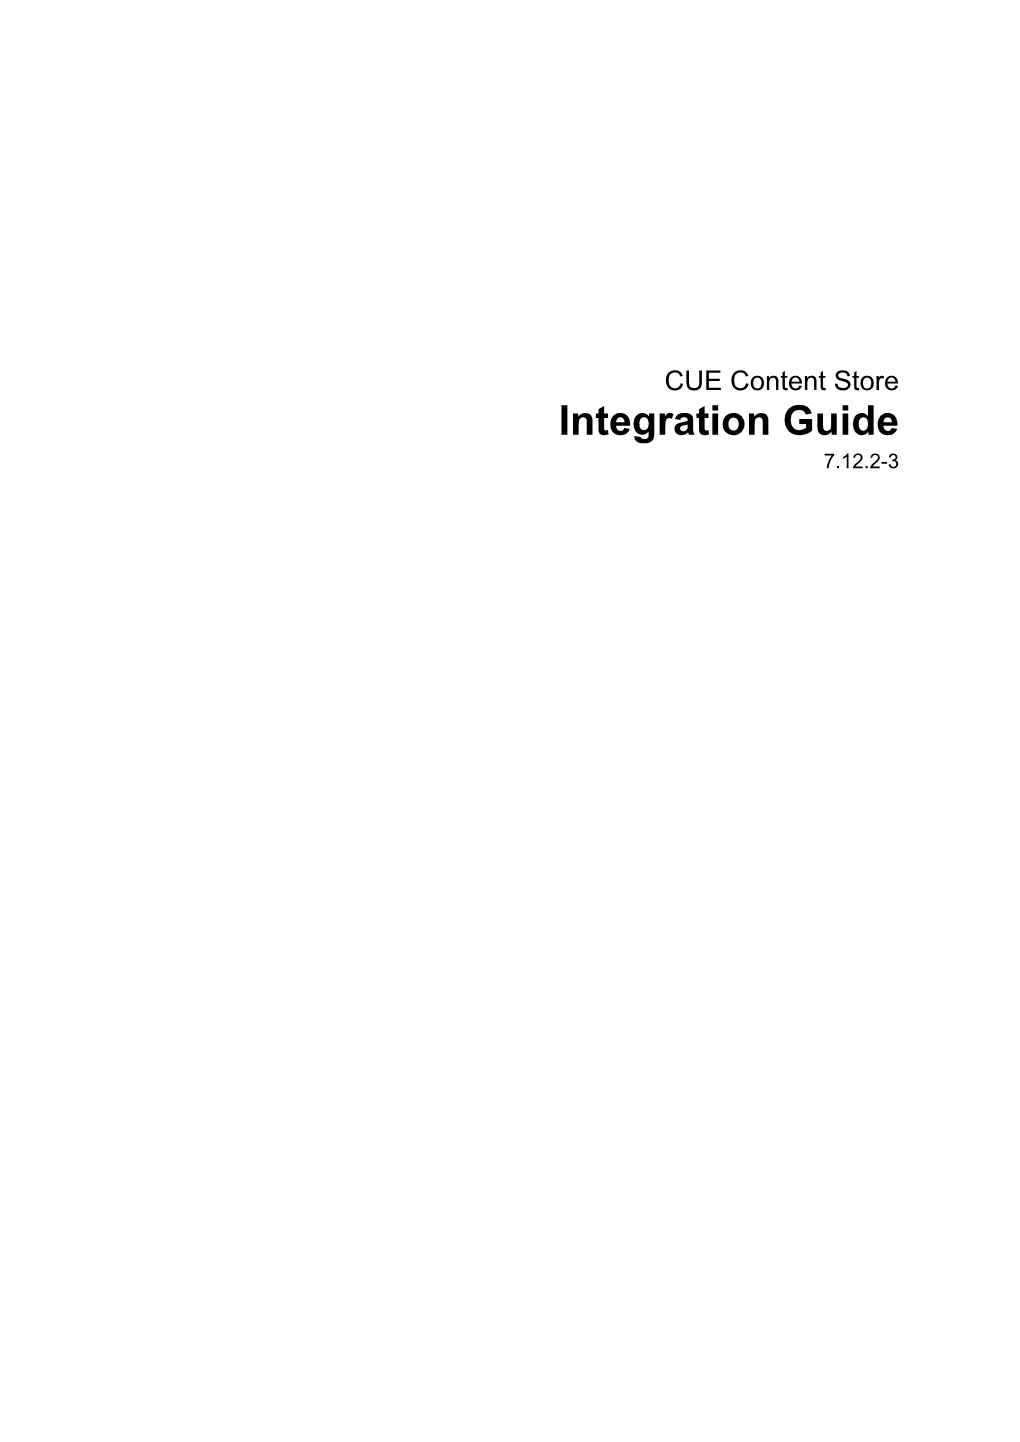 CUE Content Store Integration Guide 7.12.2-3 Table of Contents